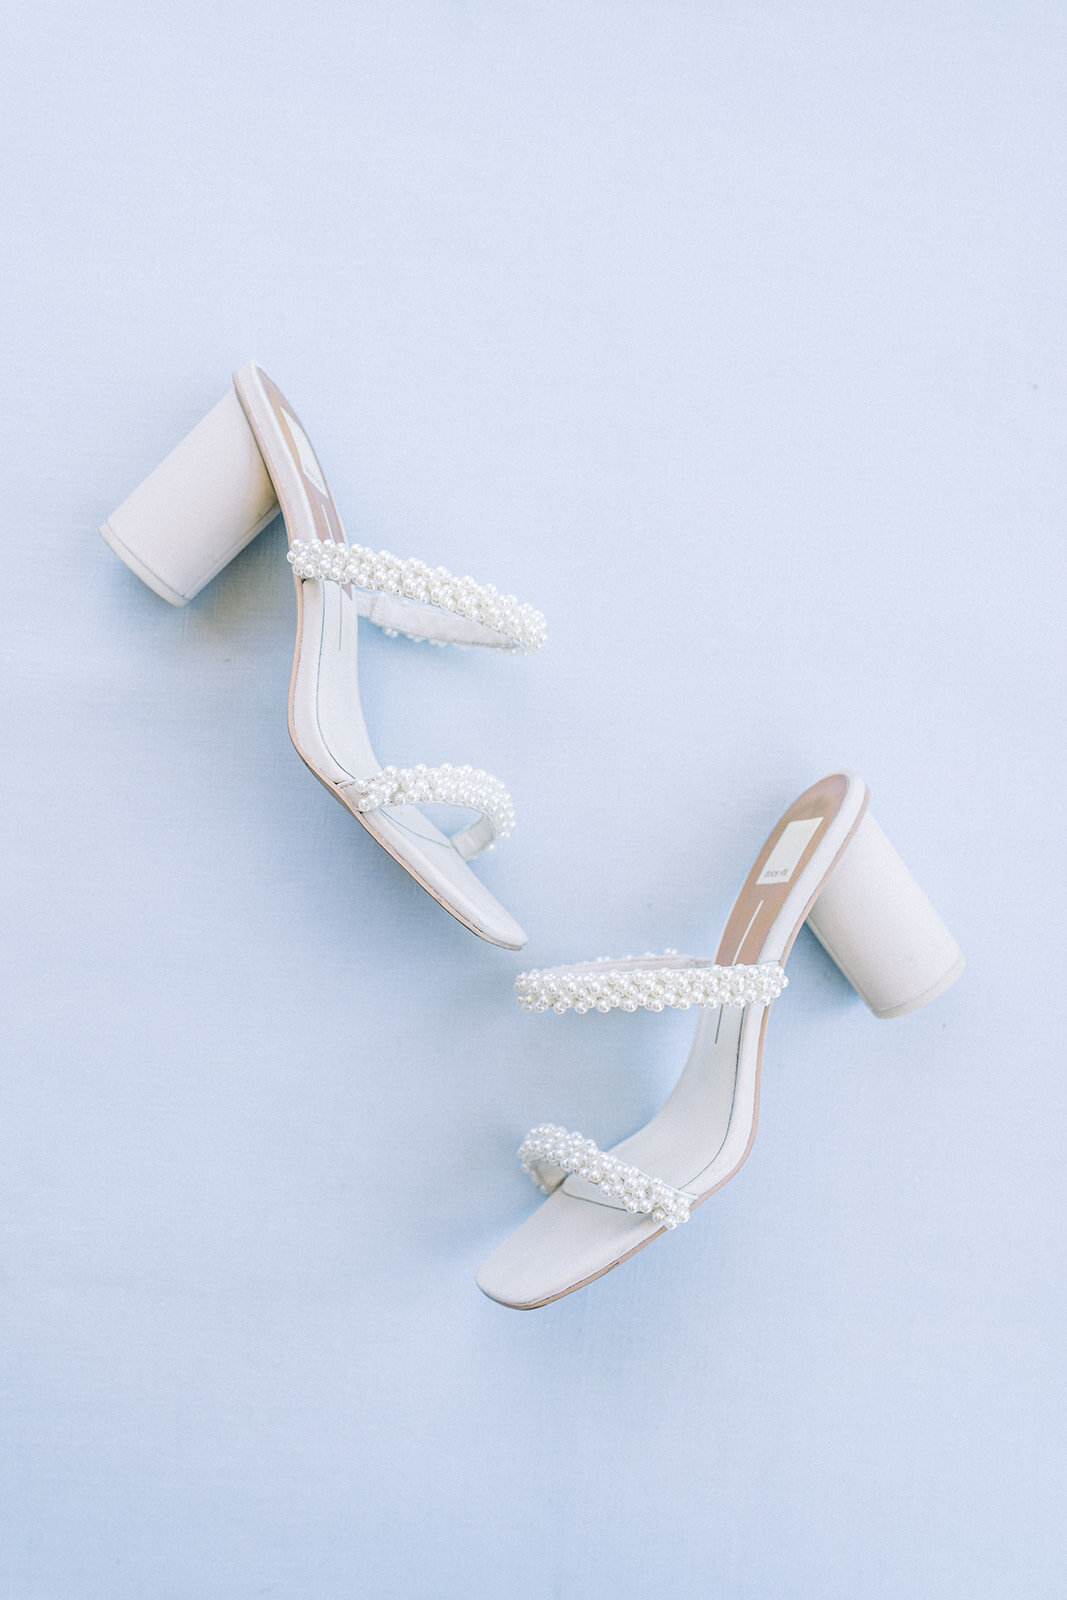 Brides wedding shoes at Dolphin Bay Resort in Pismo Beach, CA